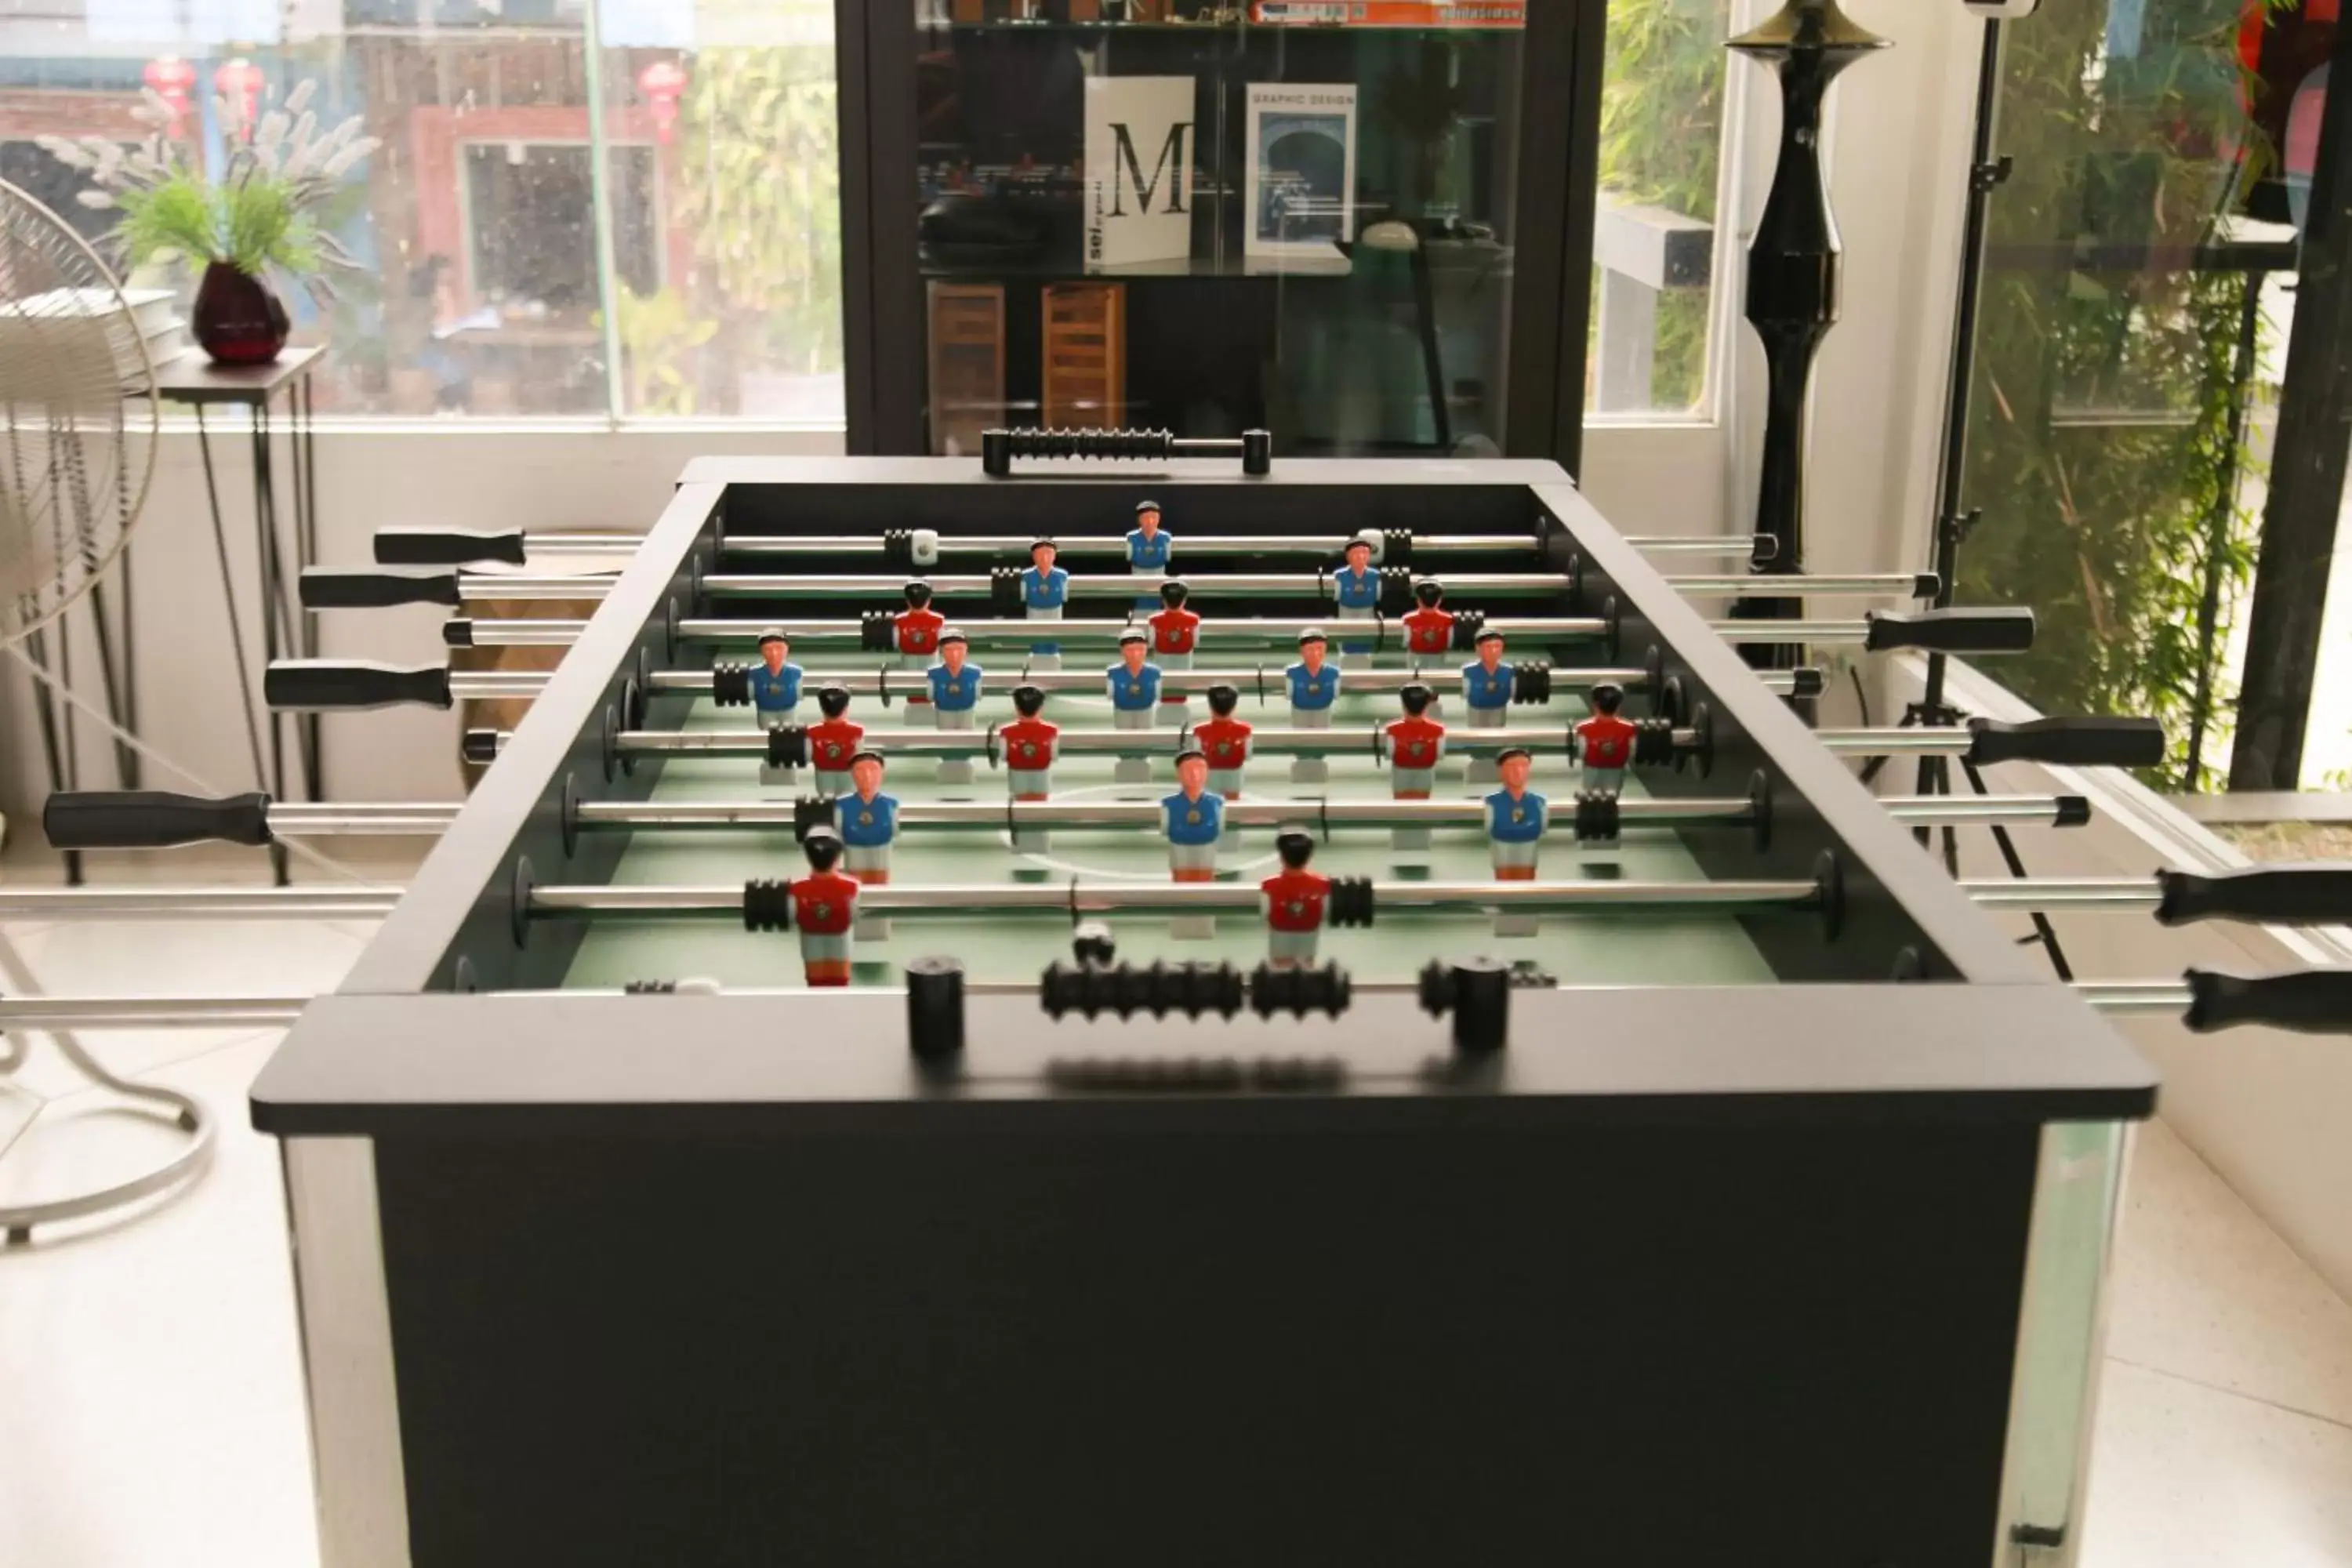 Game Room, Other Activities in Mittapan Hotel